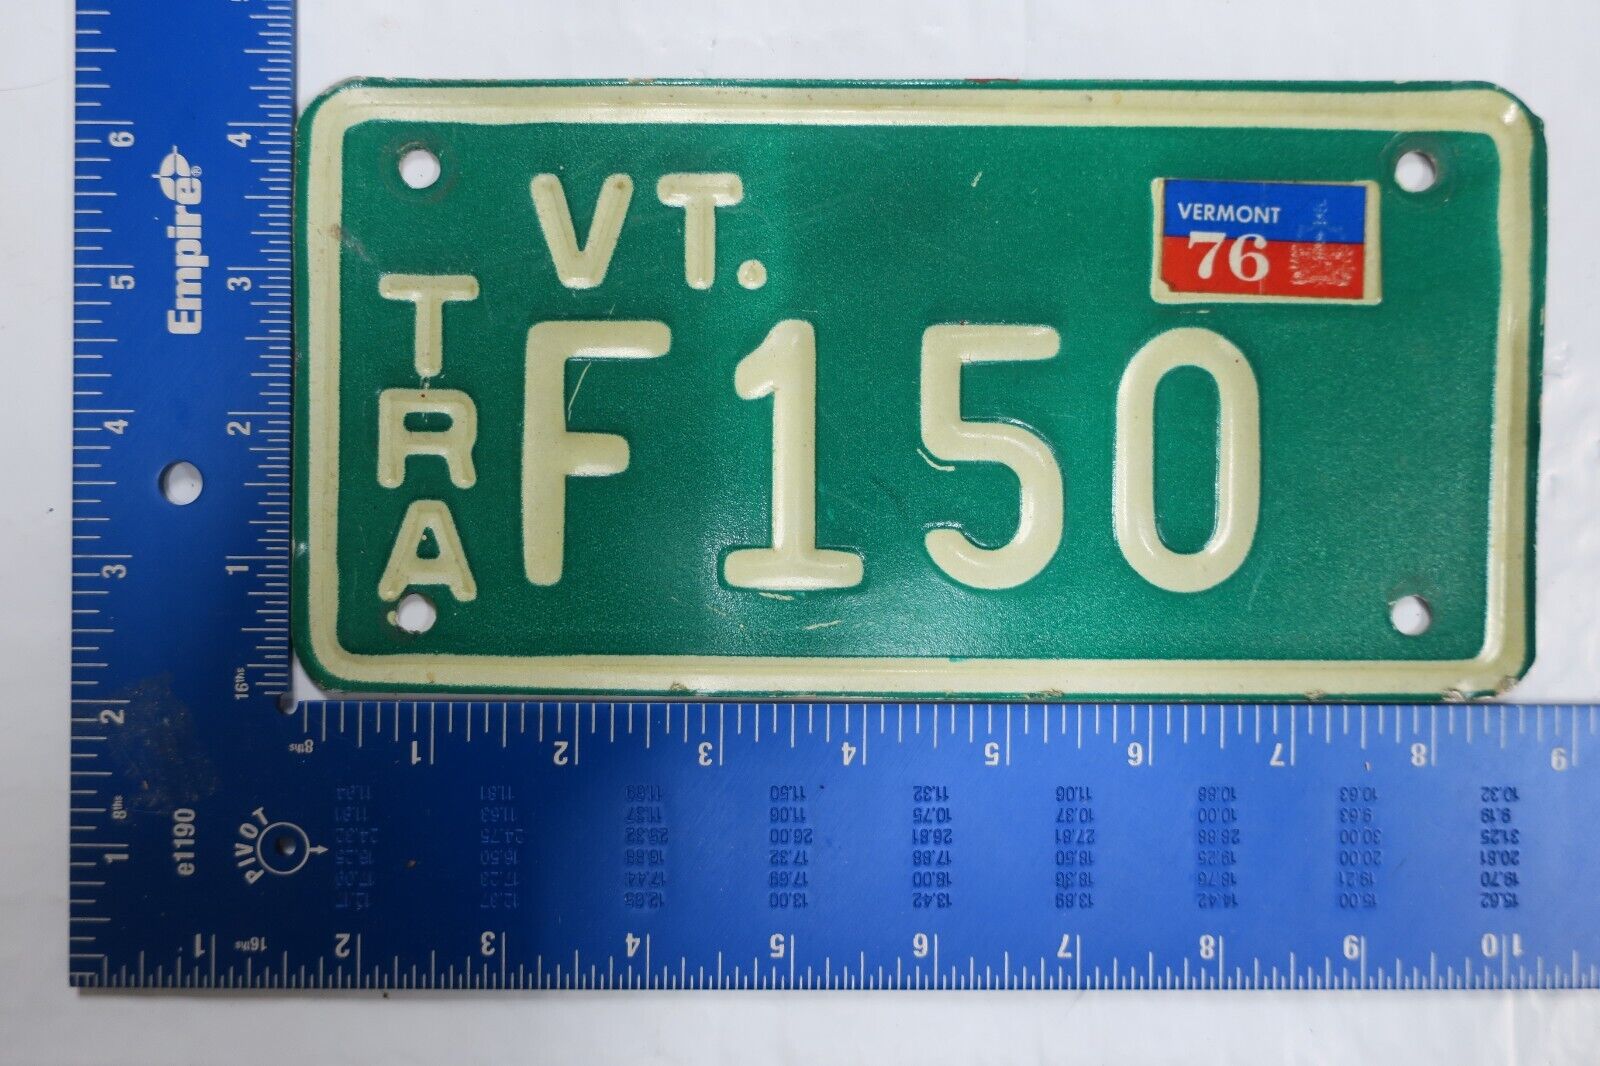 1976 76 VERMONT VT TRAILER TRL LICENSE PLATE TAG # F150 F-150 FORD PICKUP TRUCK